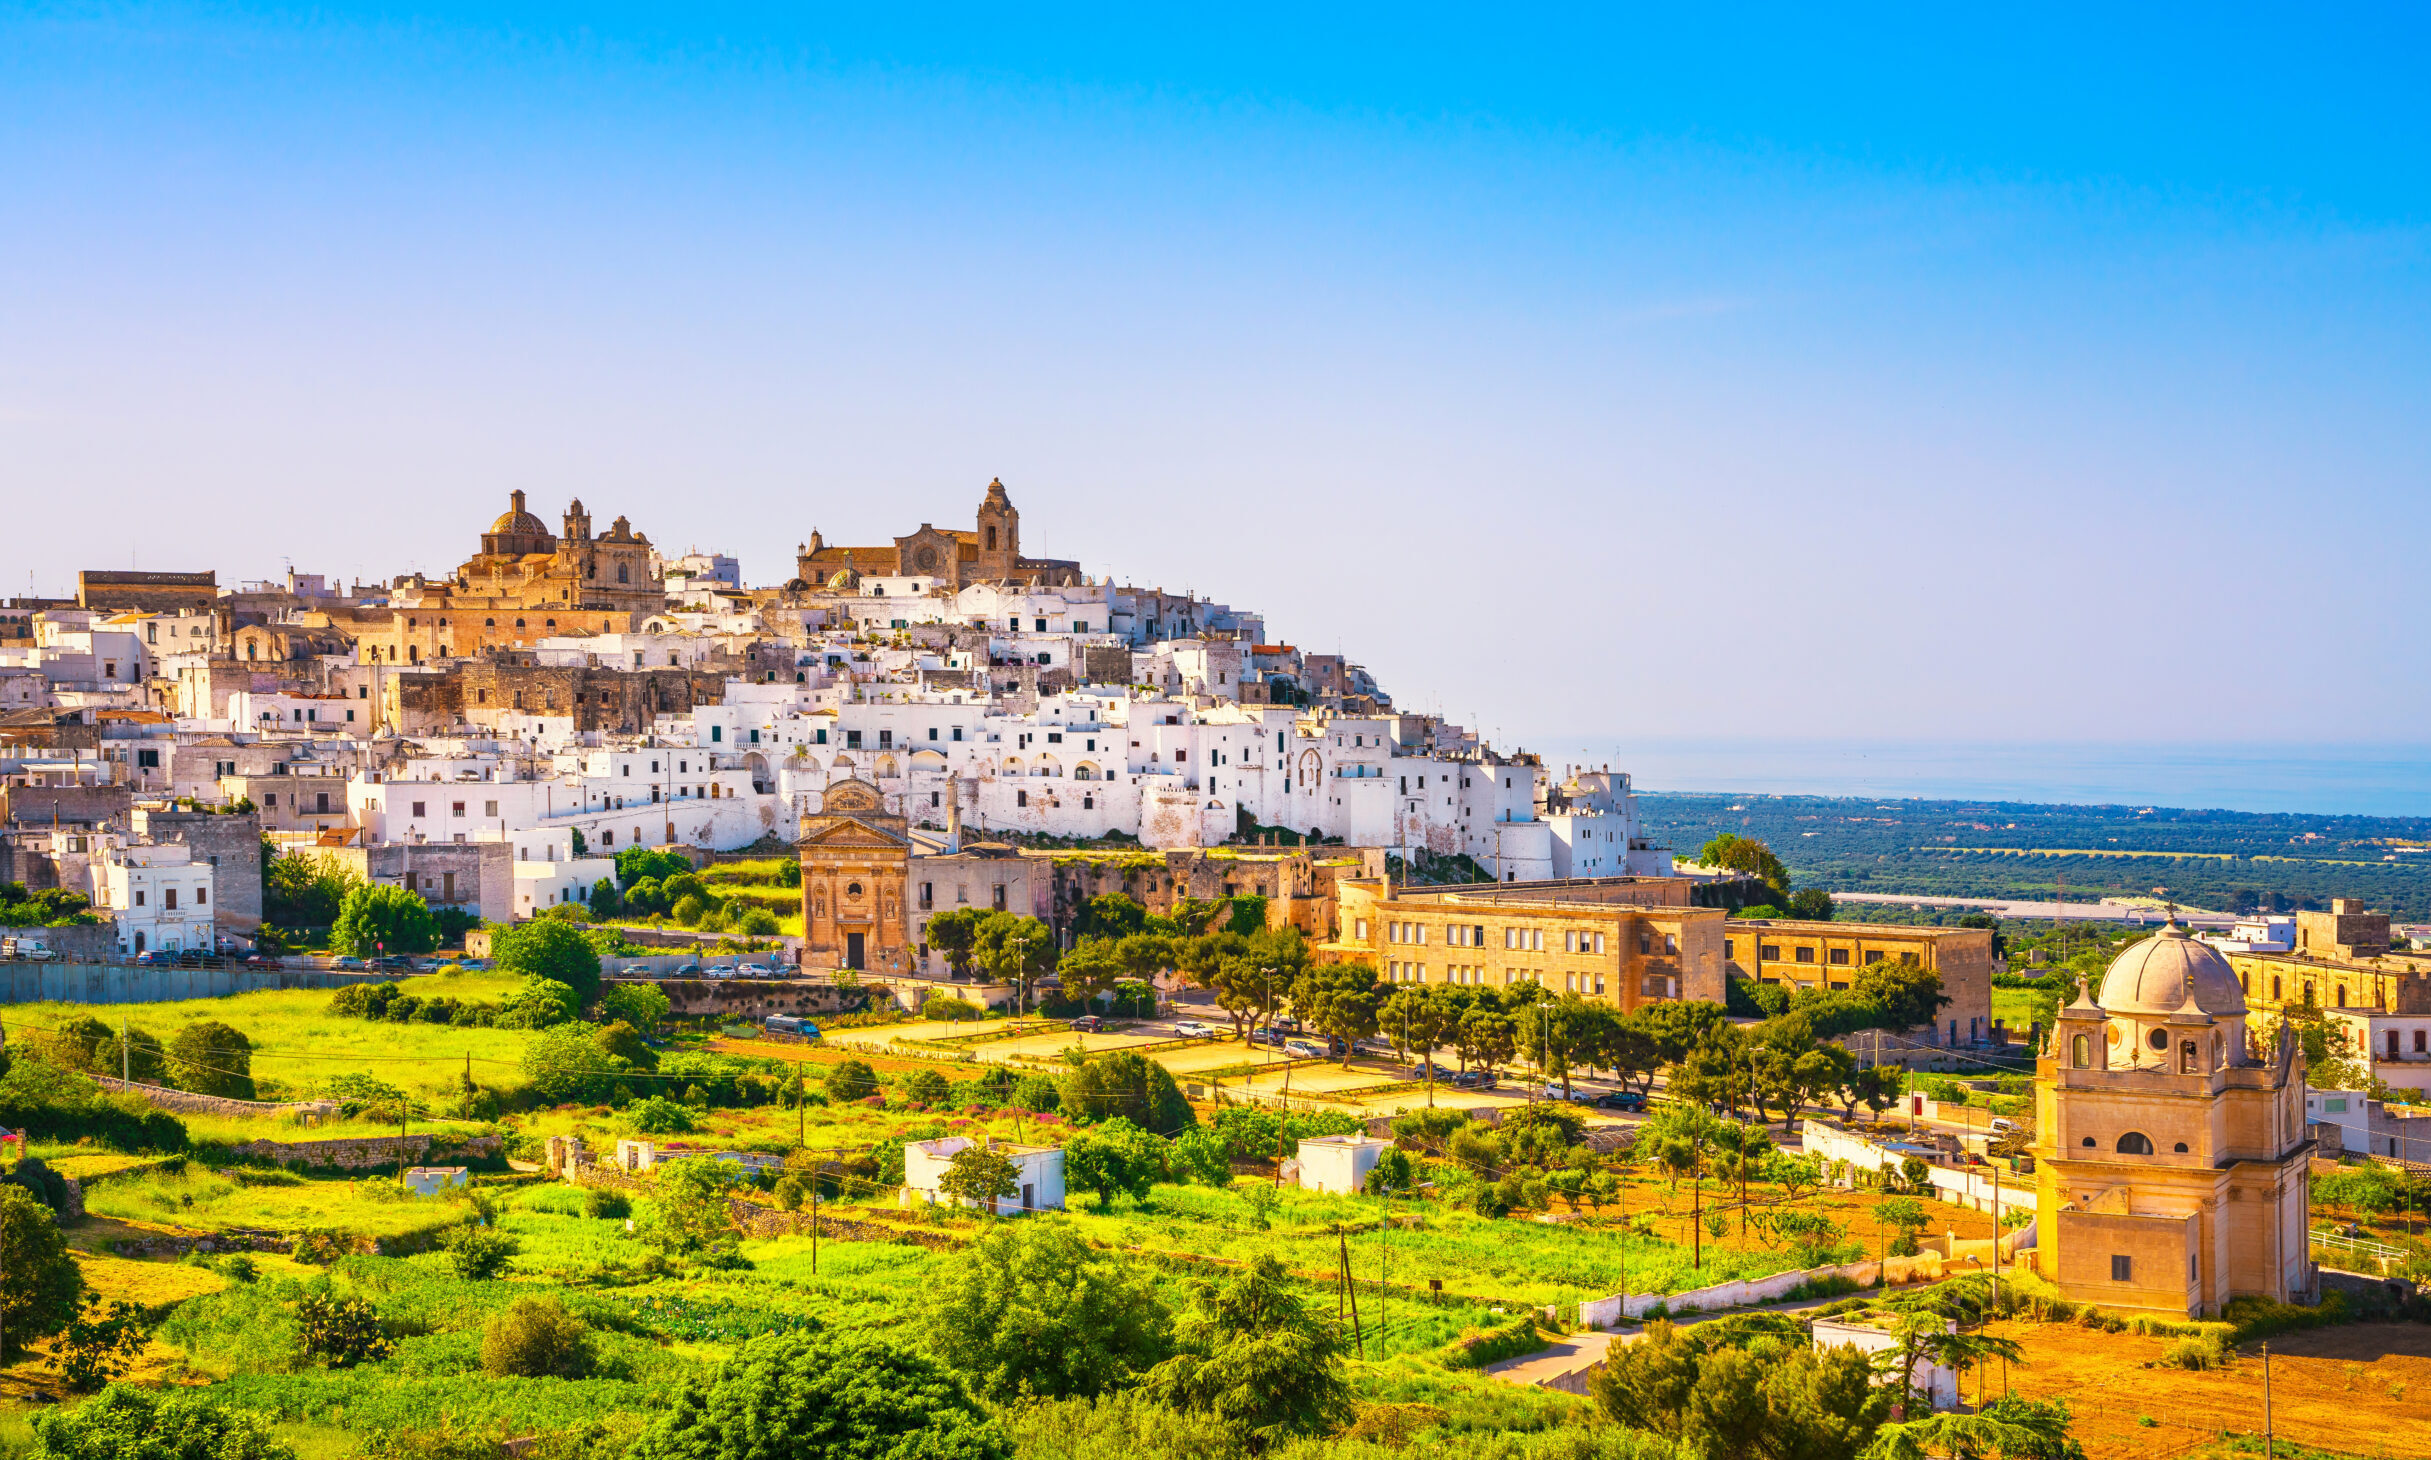 Skyline of Ostuni the so called white town in Brindisi.